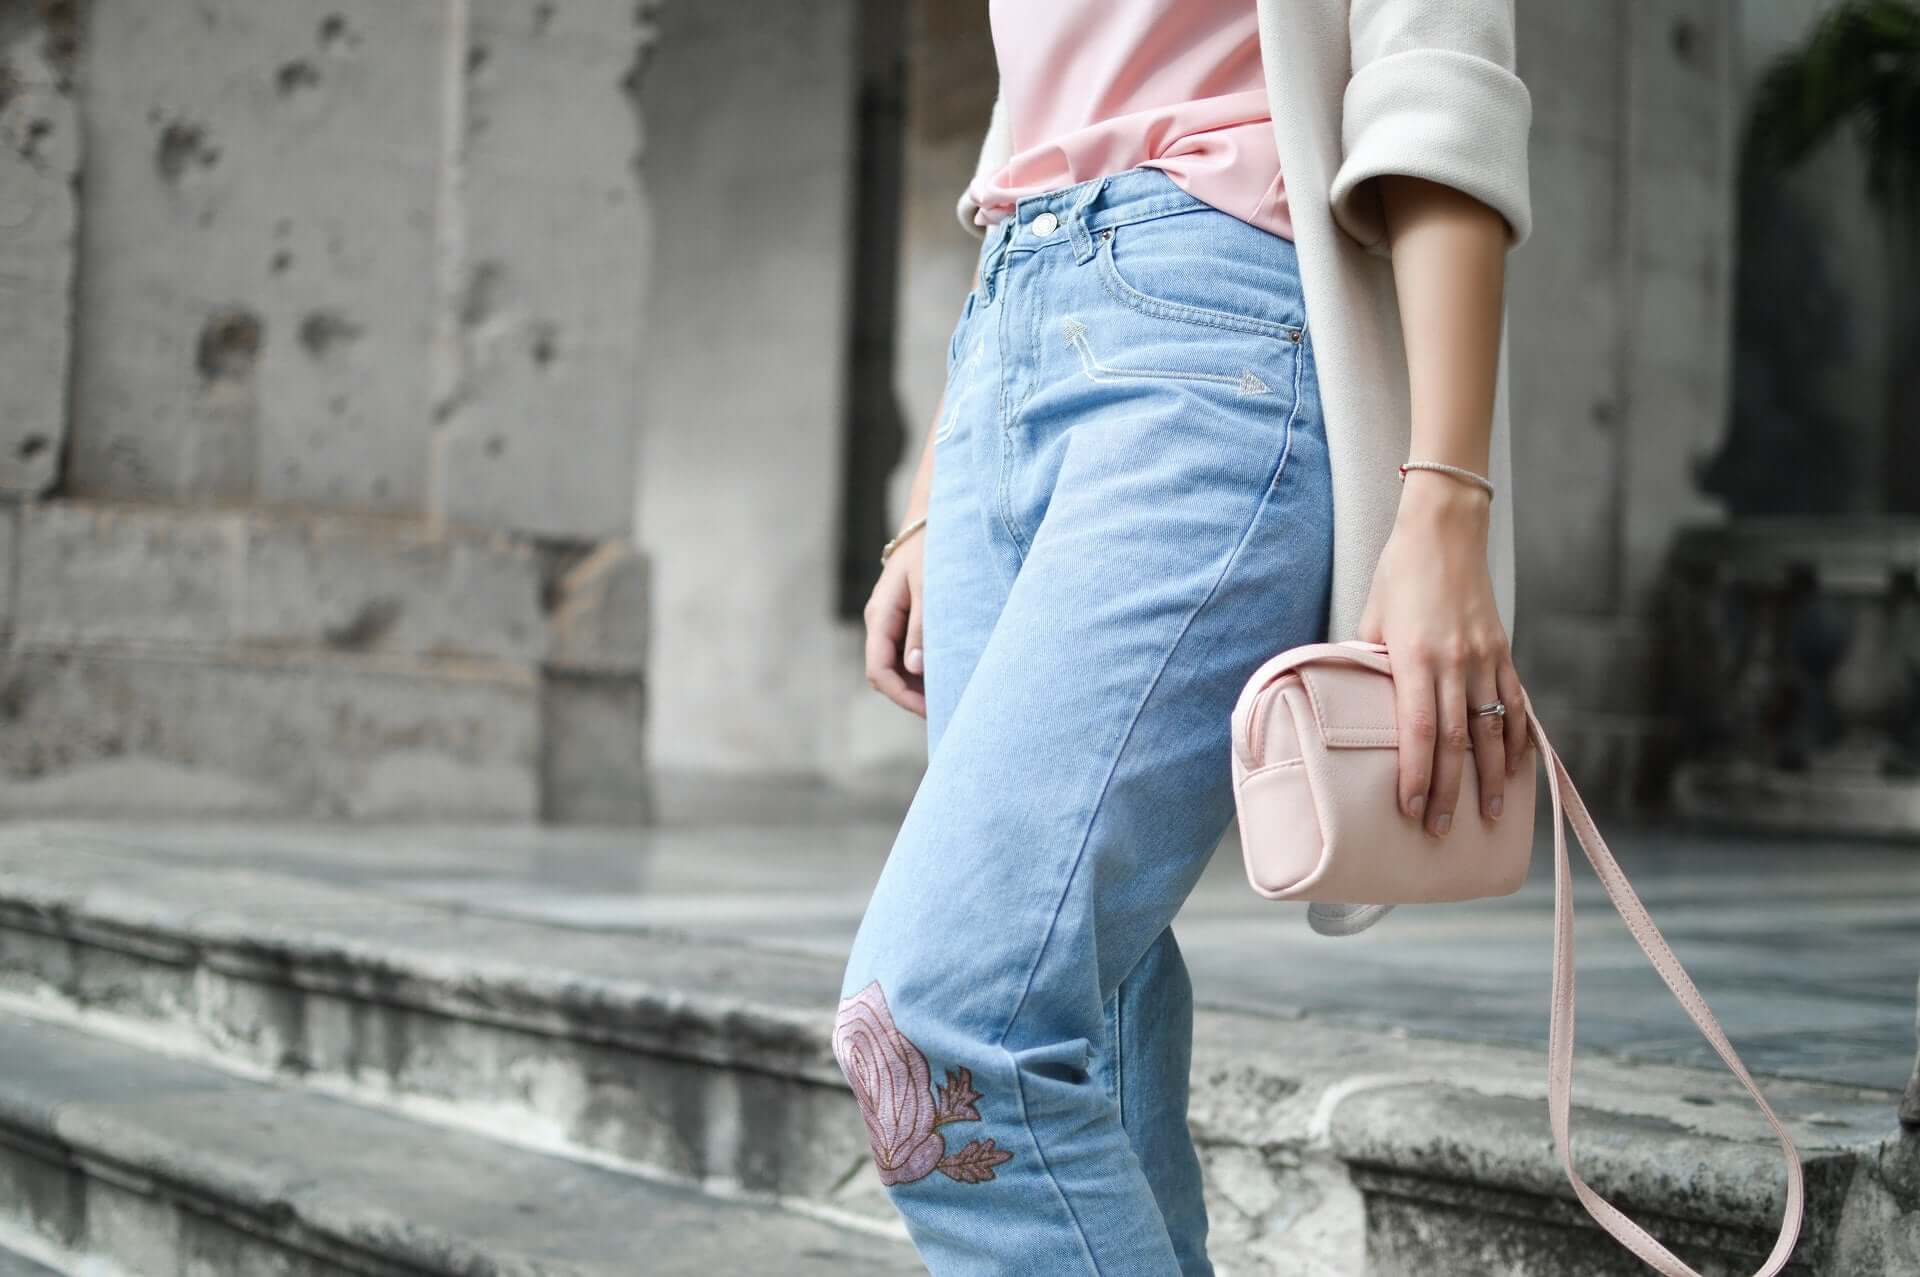 A woman in jeans, a pink top, and a cream sweater holds a pink clutch bag to one side.